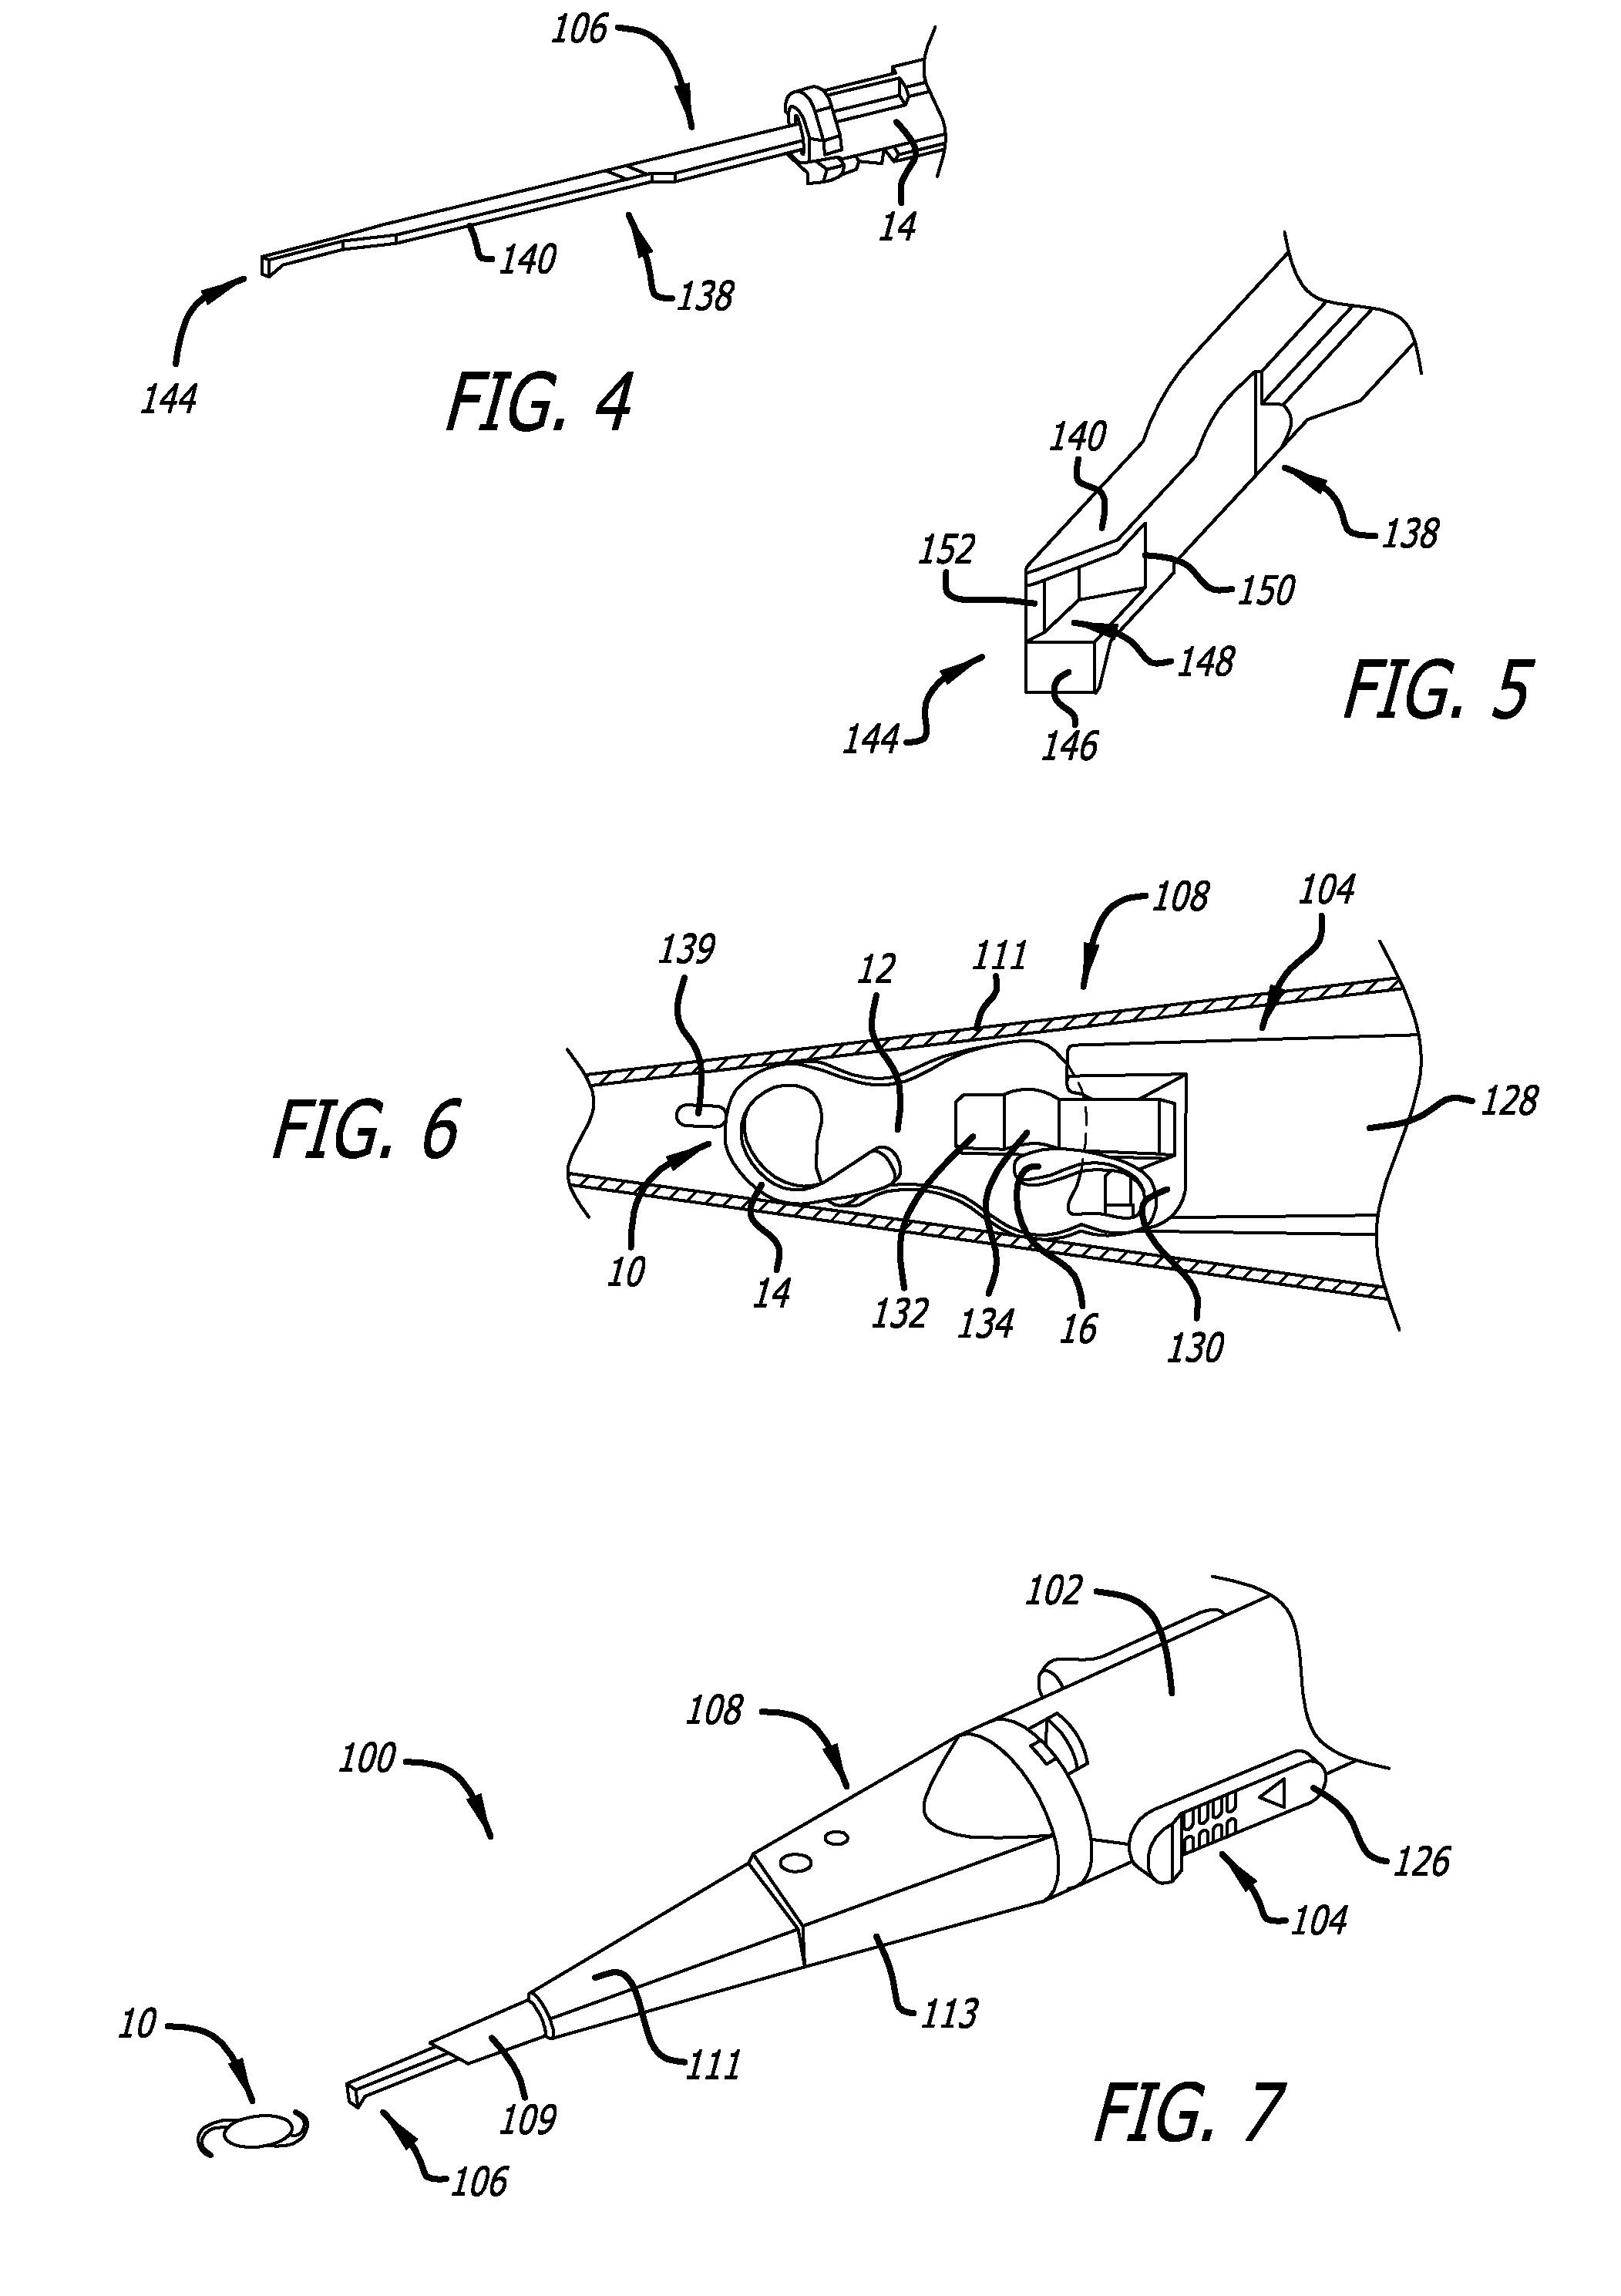 Ocular implant insertion apparatus and methods